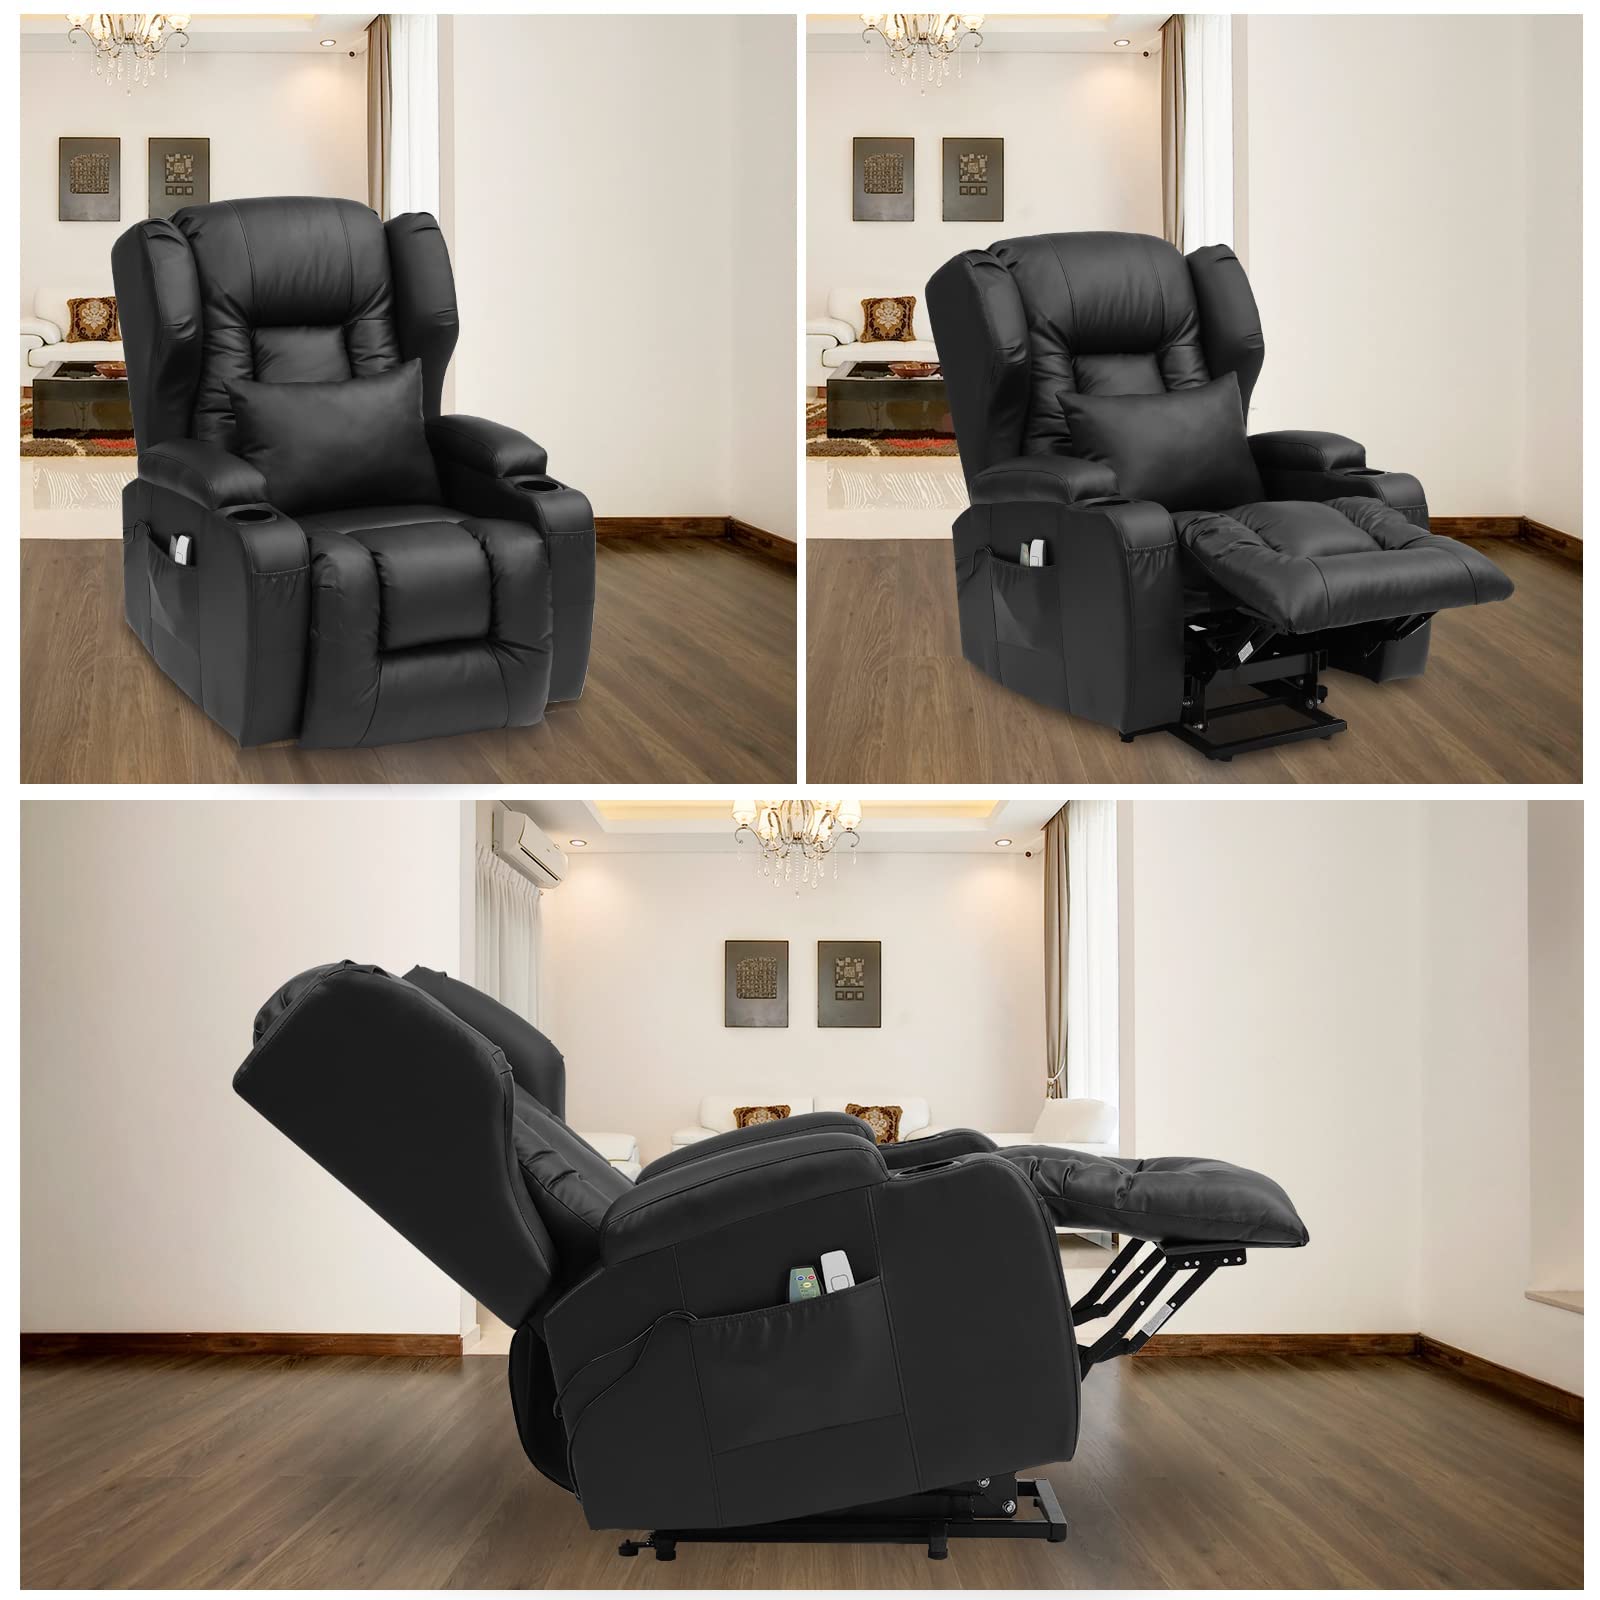 N\\A NA NA Electric Power Lift Recliner Chair for Elderly with Massage and Heat, Motorized Recliner Sofa for Living Room with Remote 